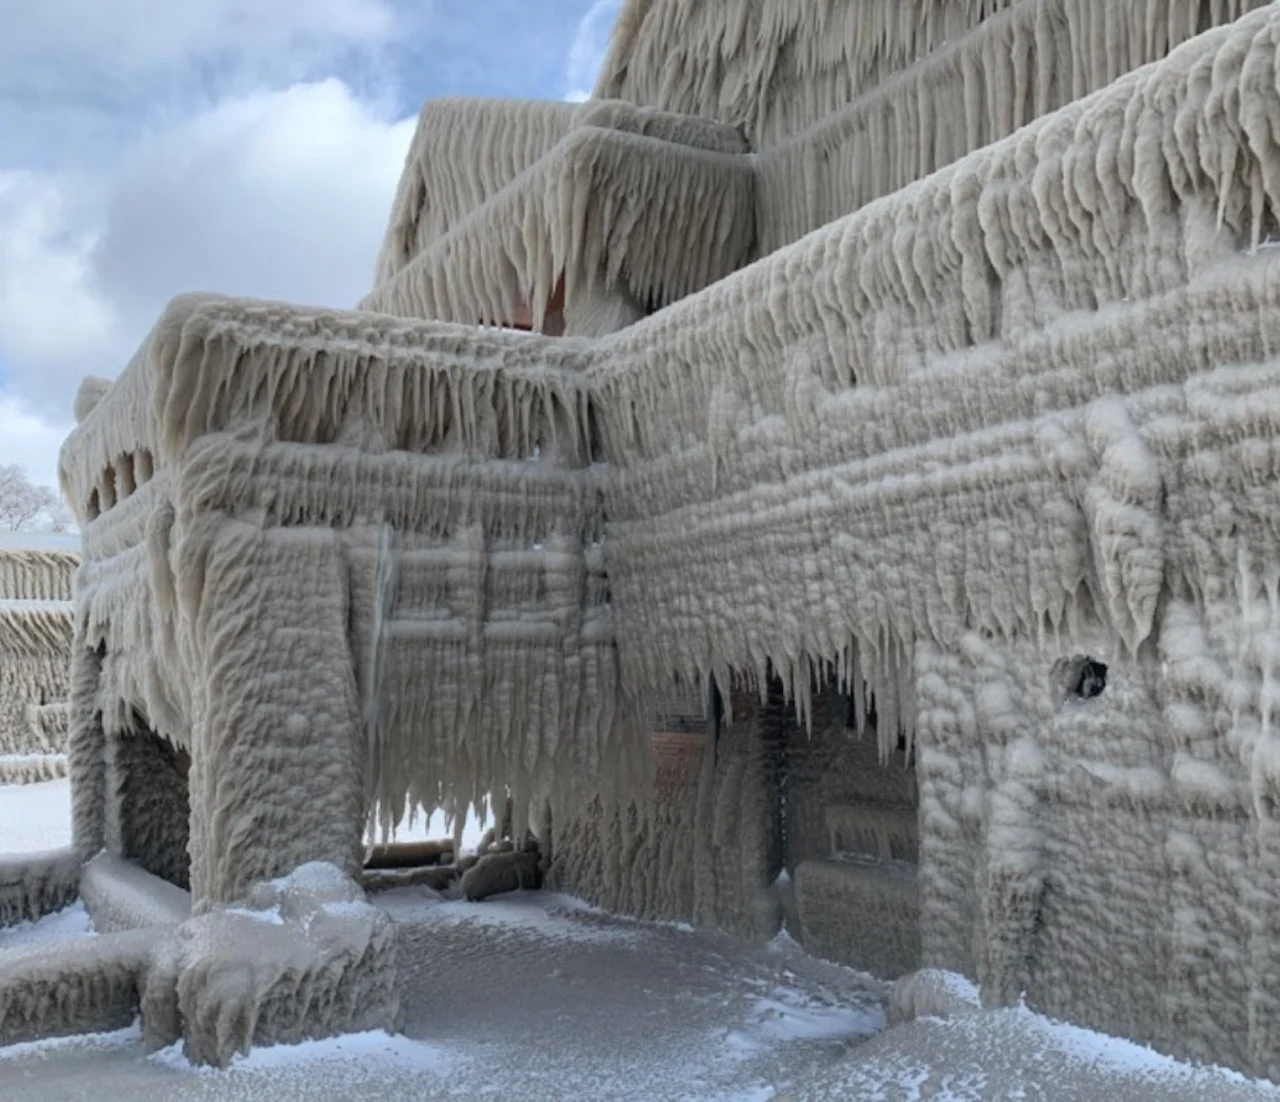 The frozen houses that looked like a scene from a fairytale or nightmare